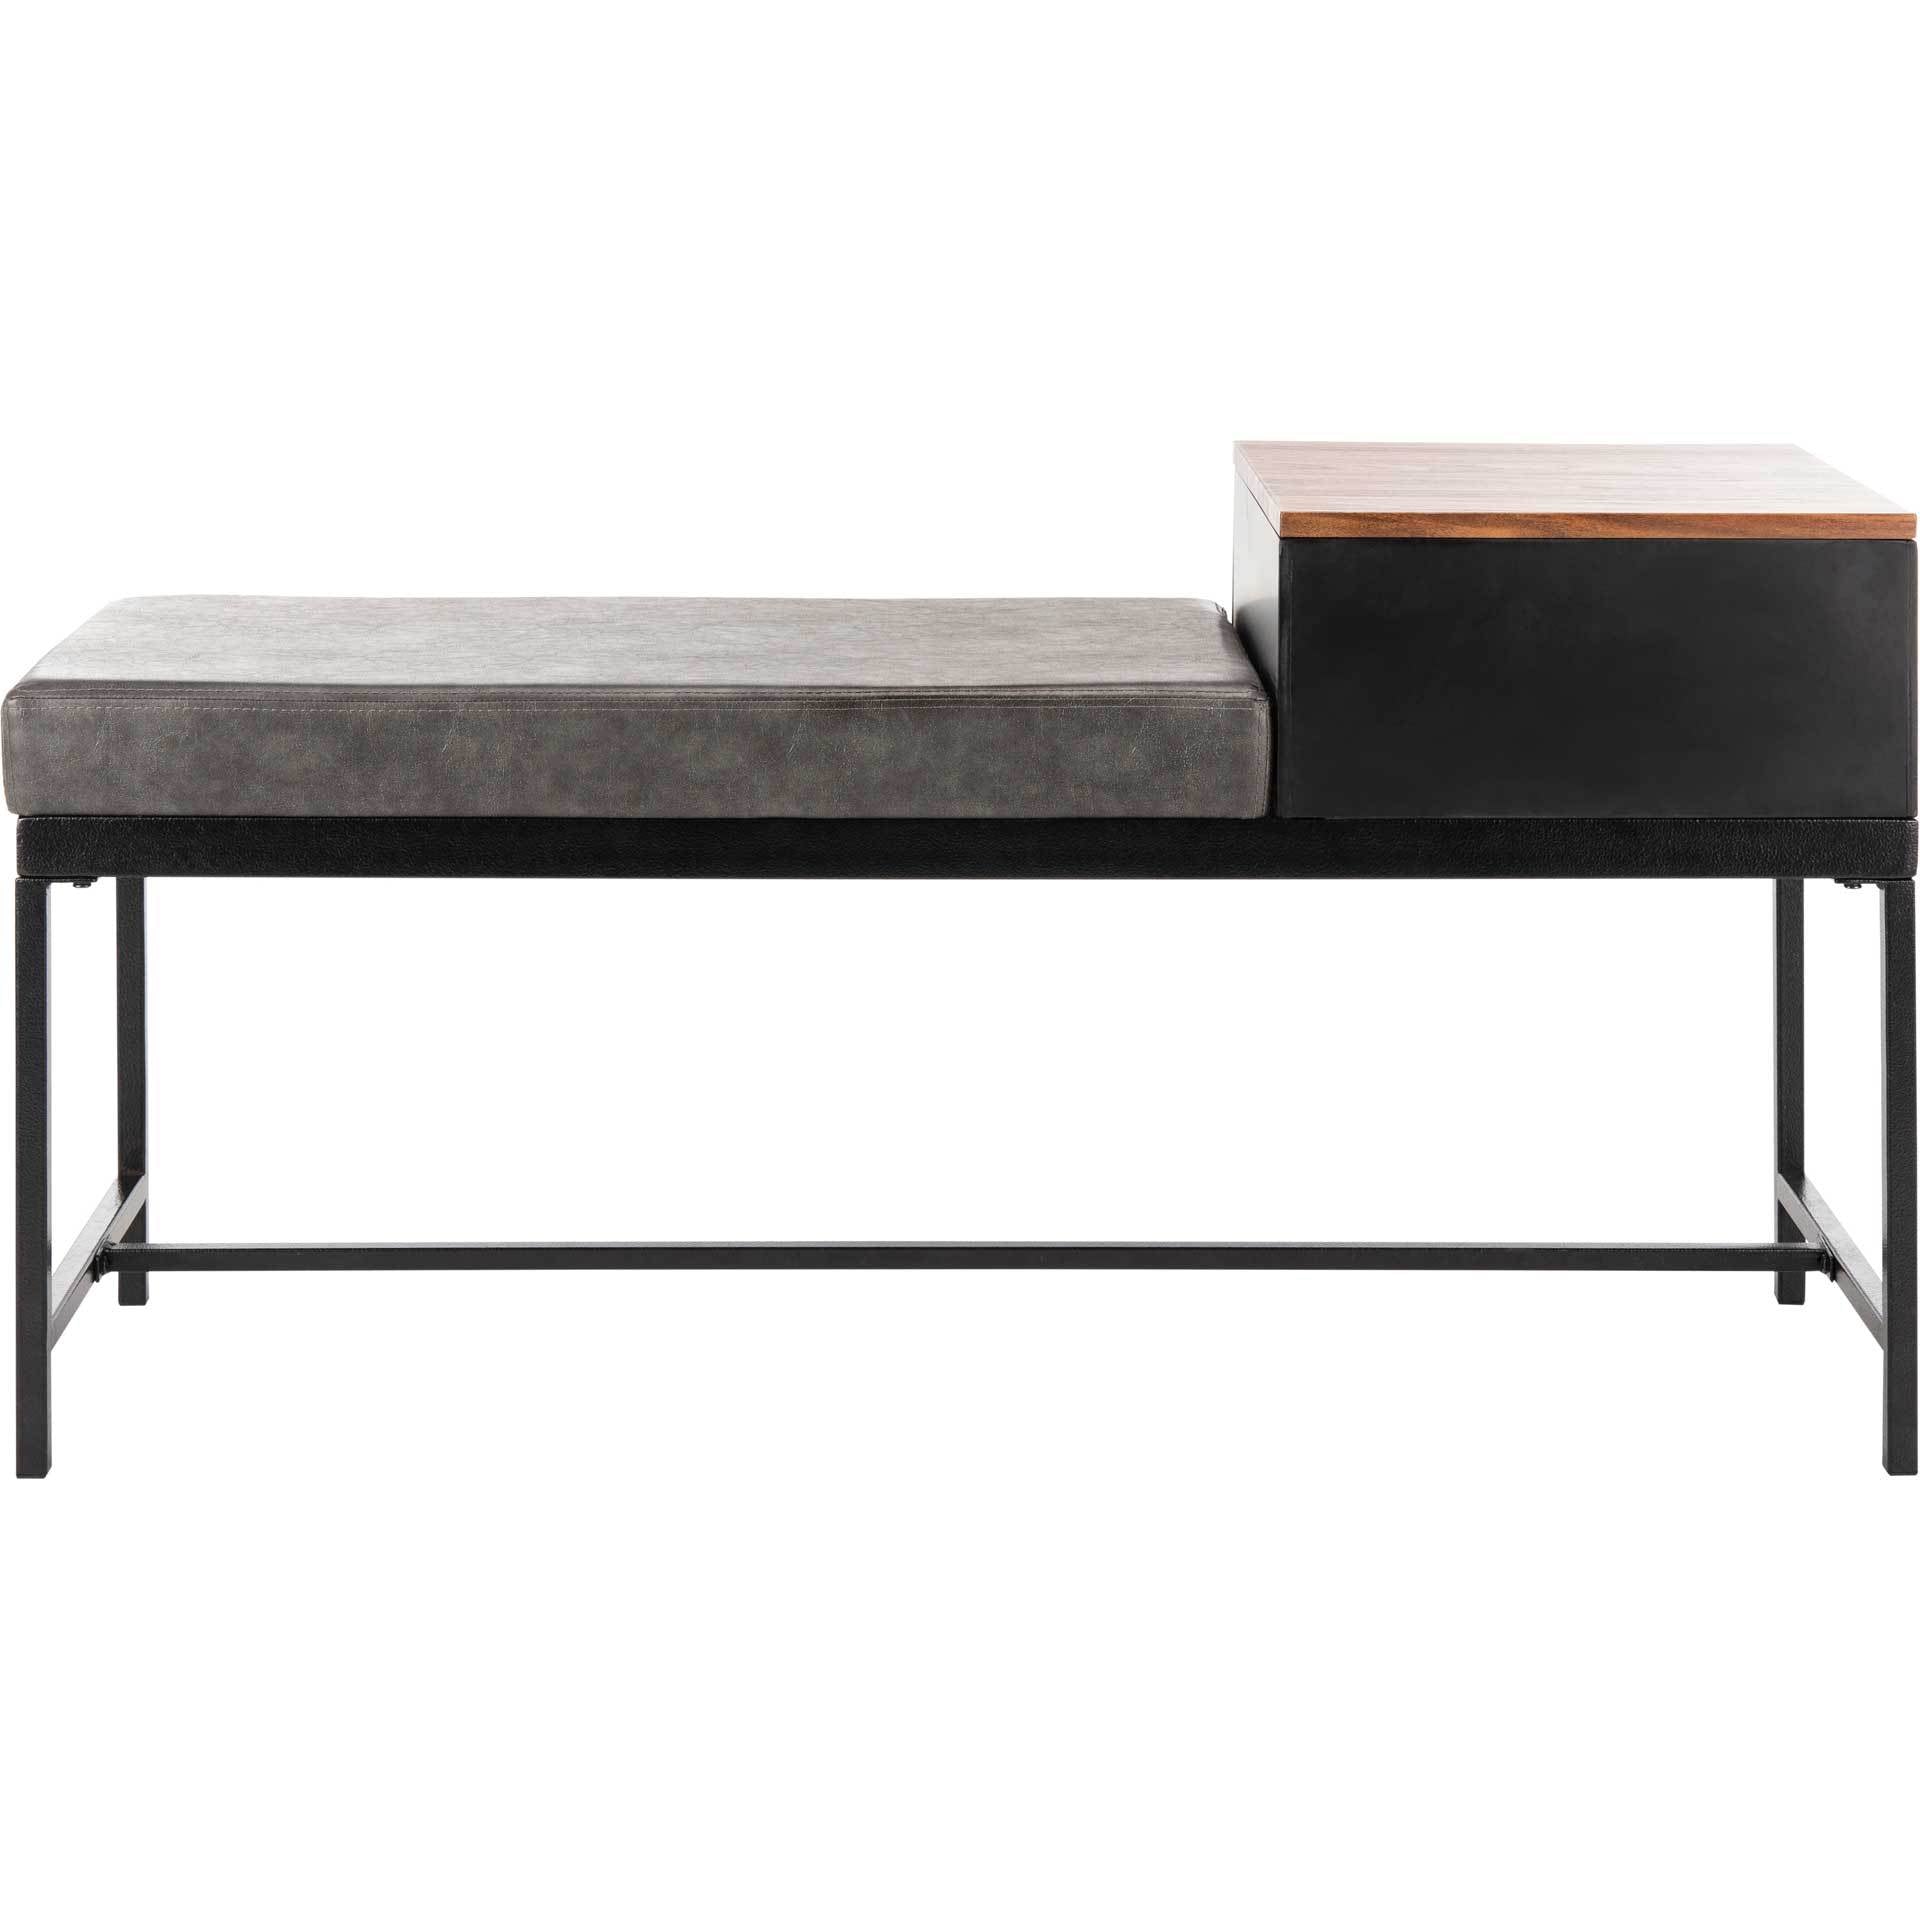 Maxton Bench With Storage Brown/Gray